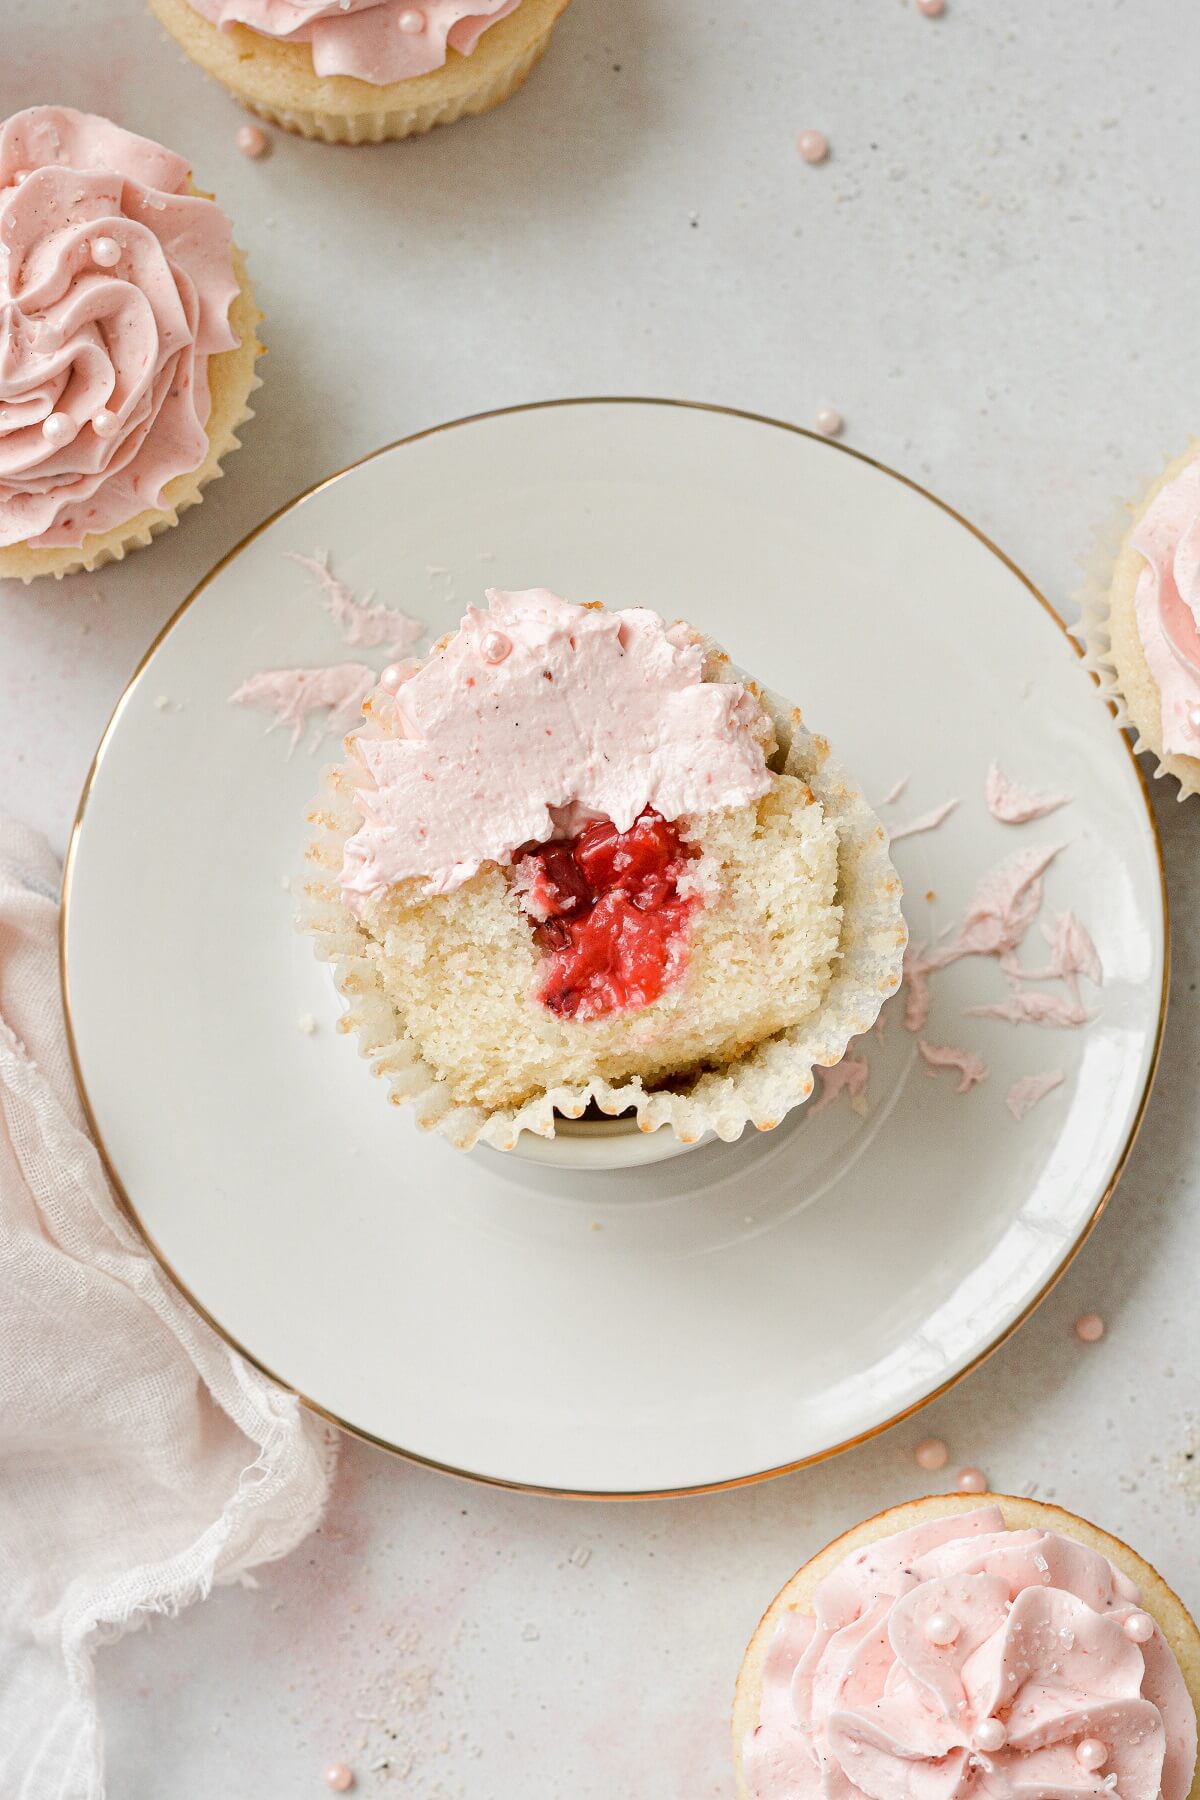 A strawberry cupcake cut in half to reveal the strawberry filling inside.